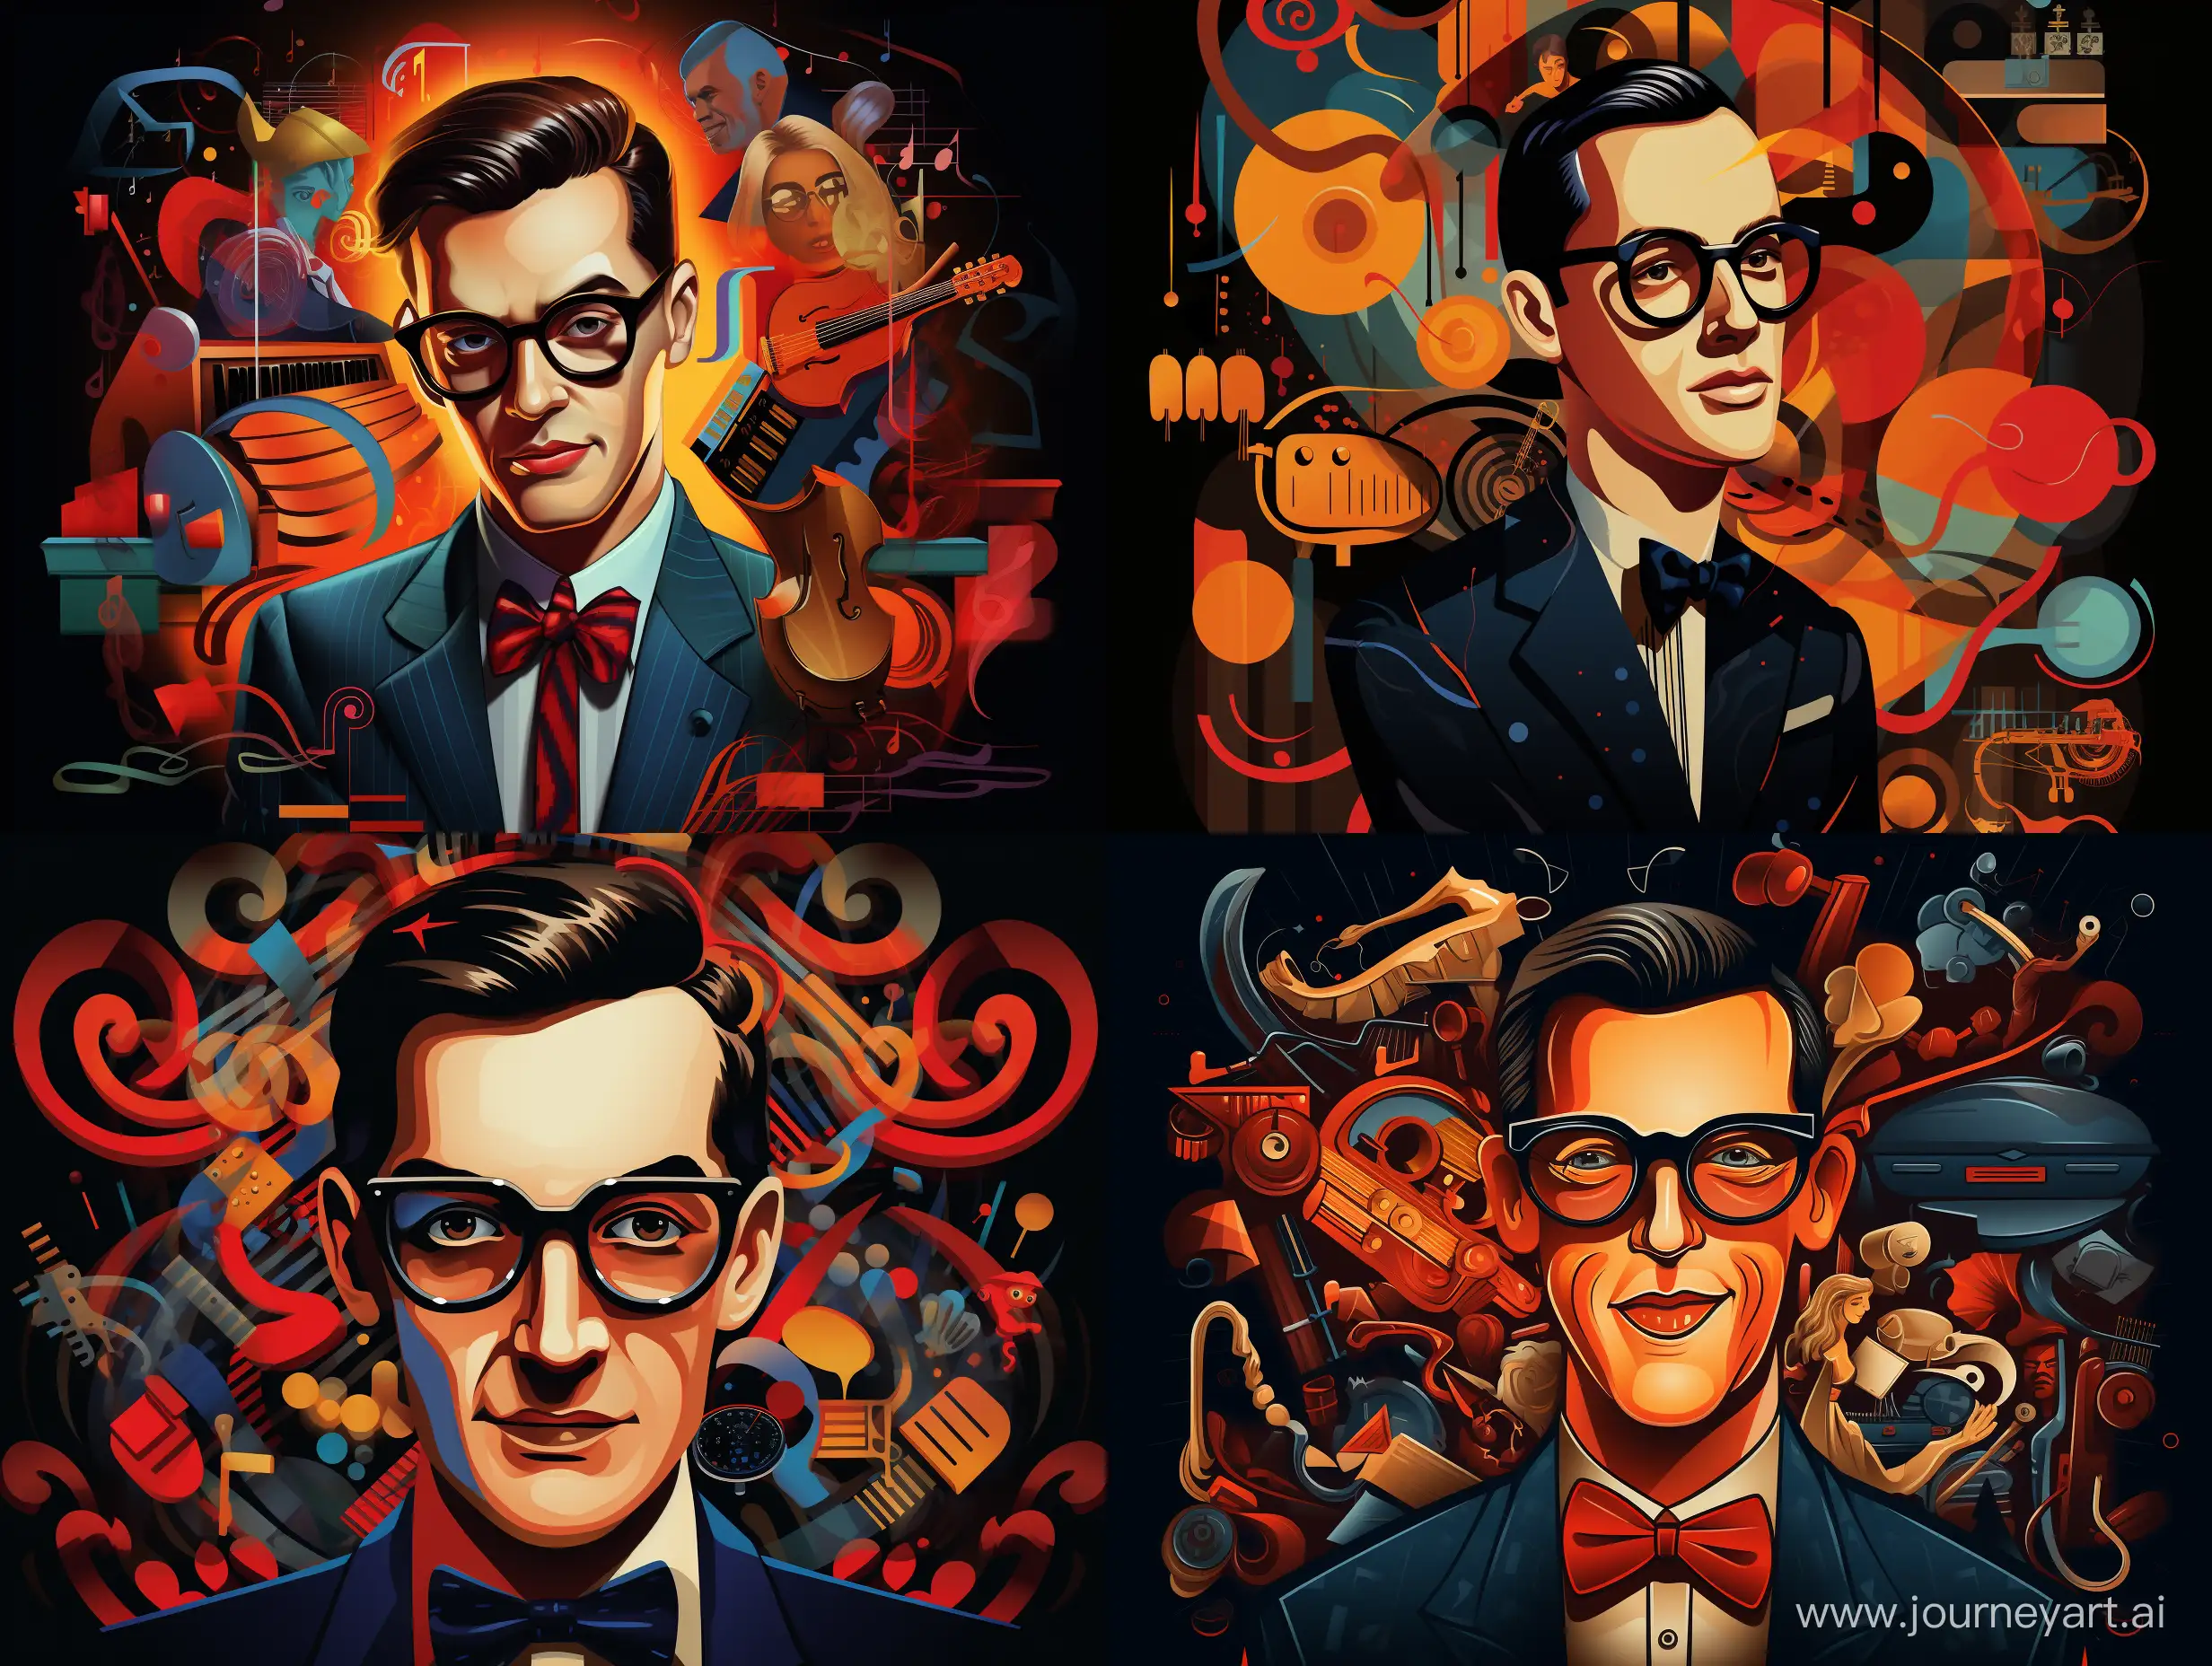 Young-Glenn-Miller-Portrait-with-Musical-Symbols-in-Pop-Art-Style